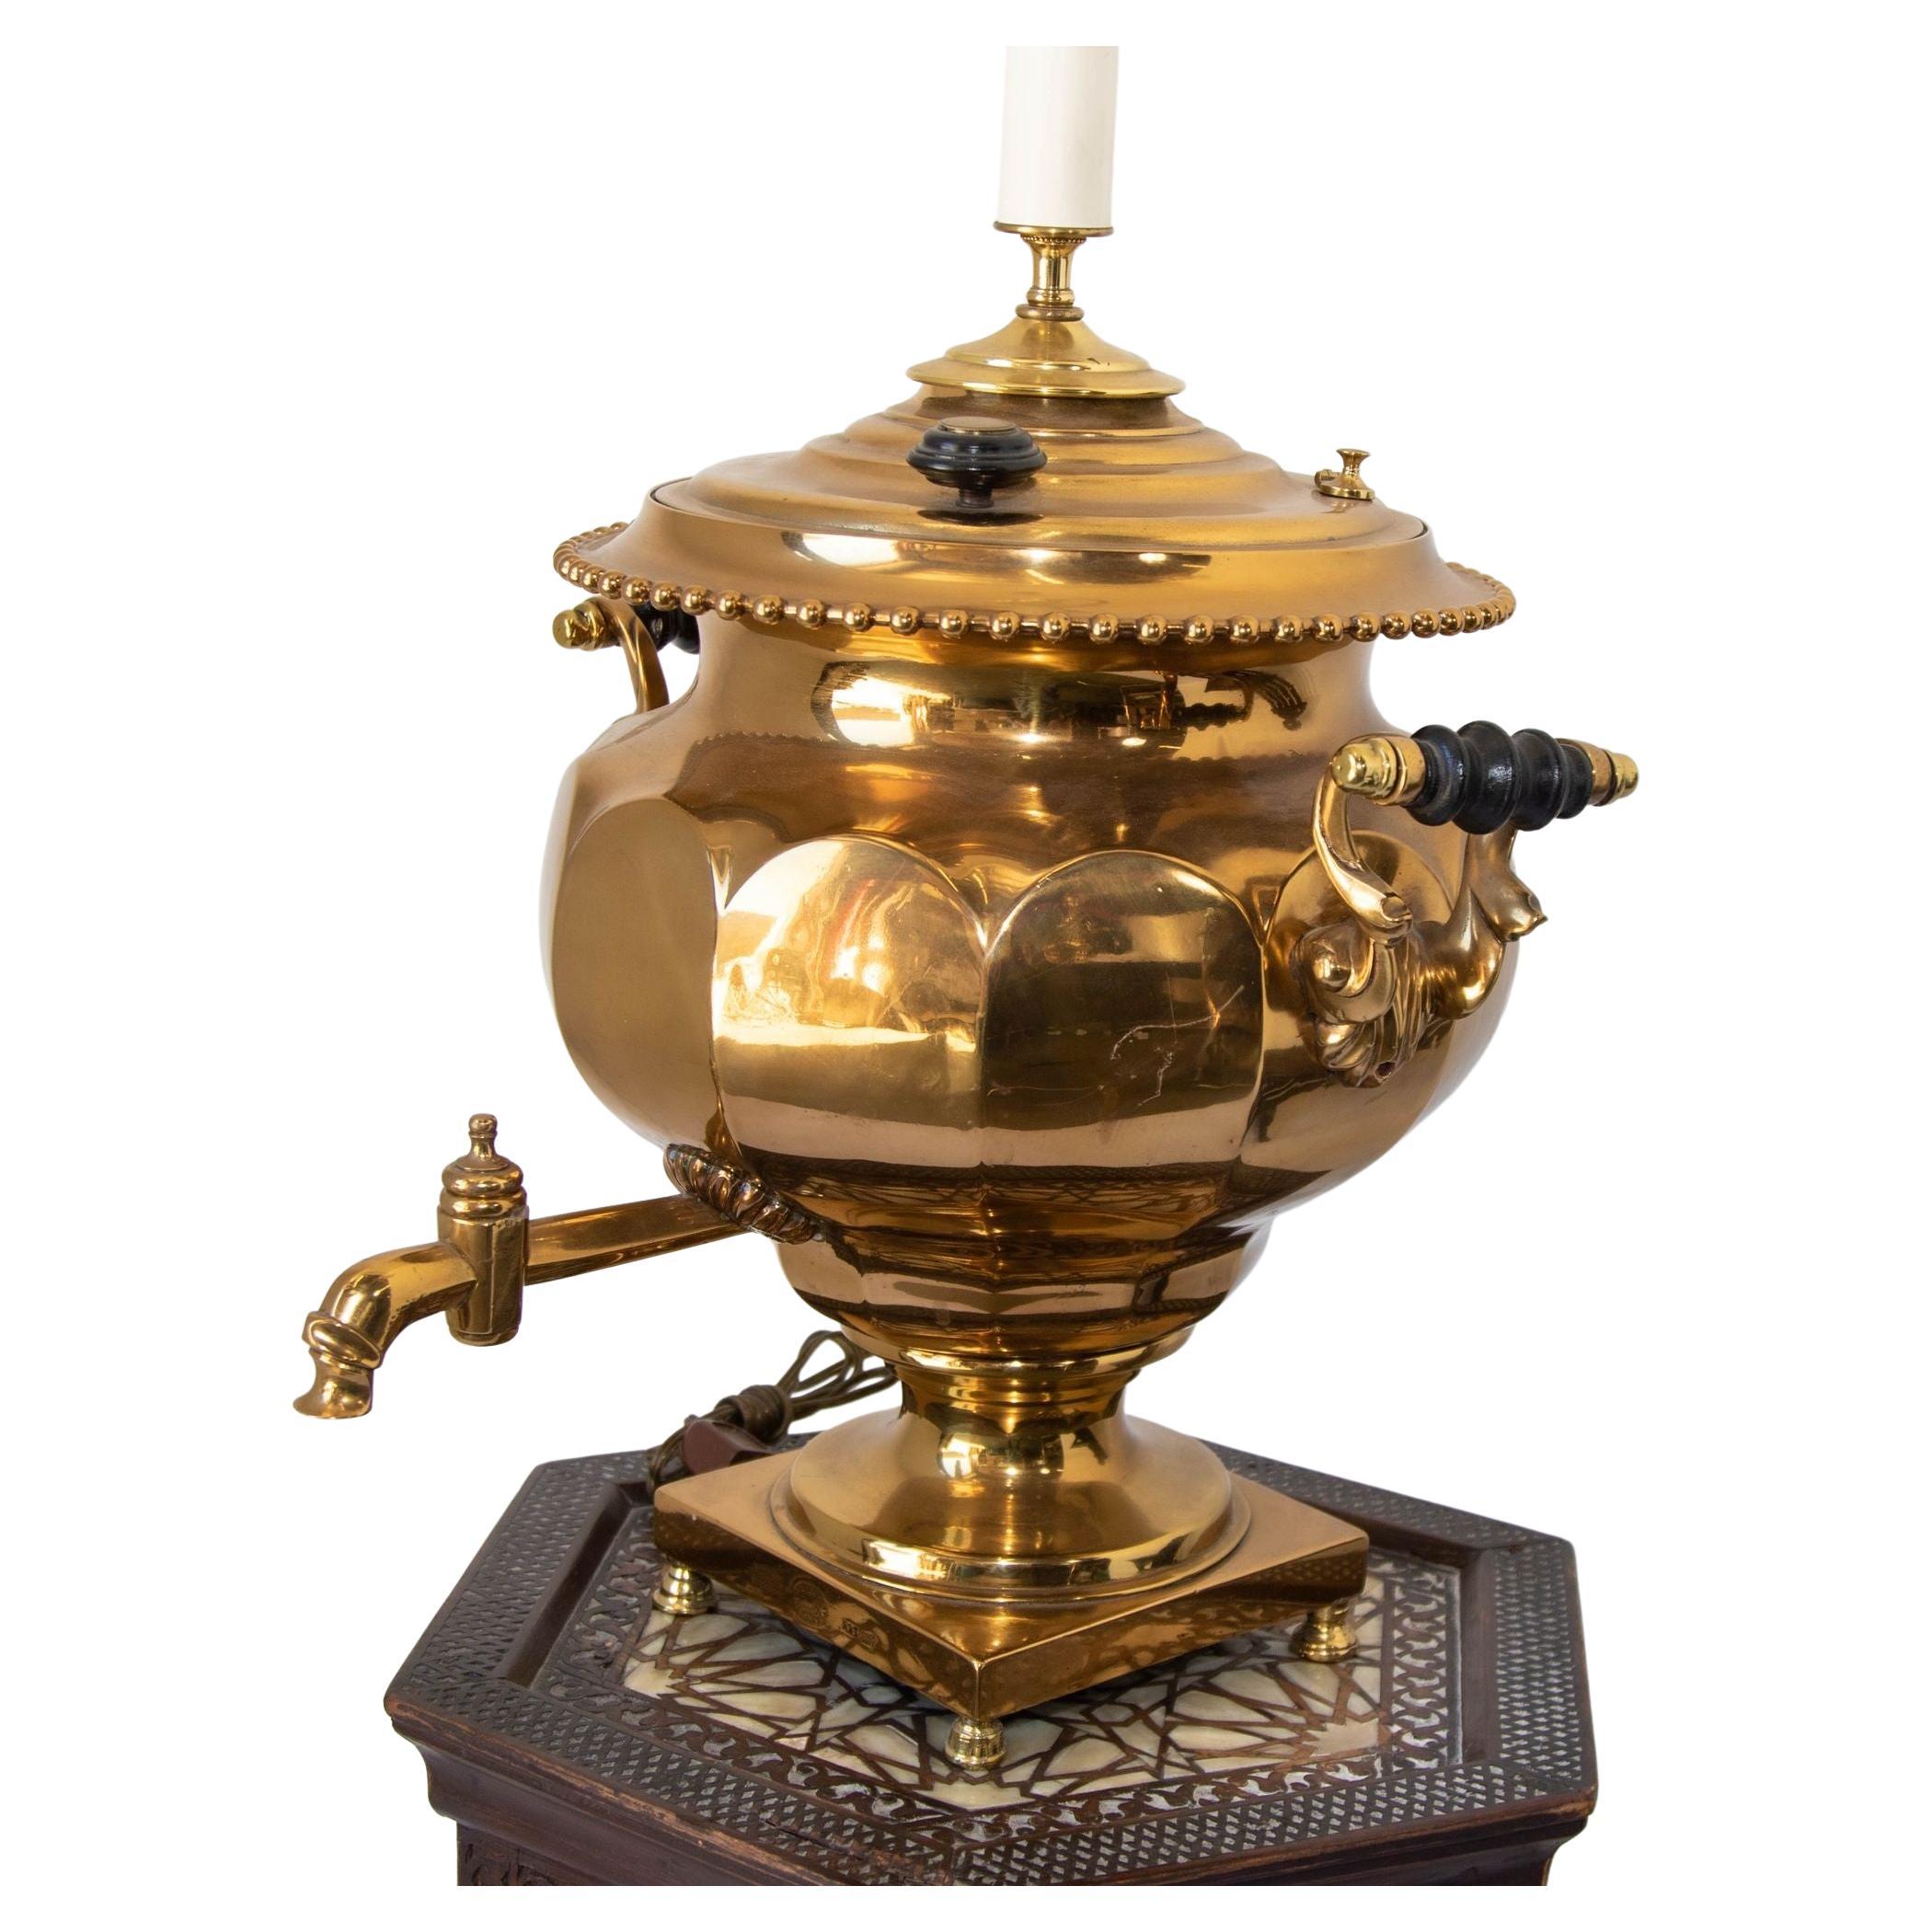 What is a Russian samovar?